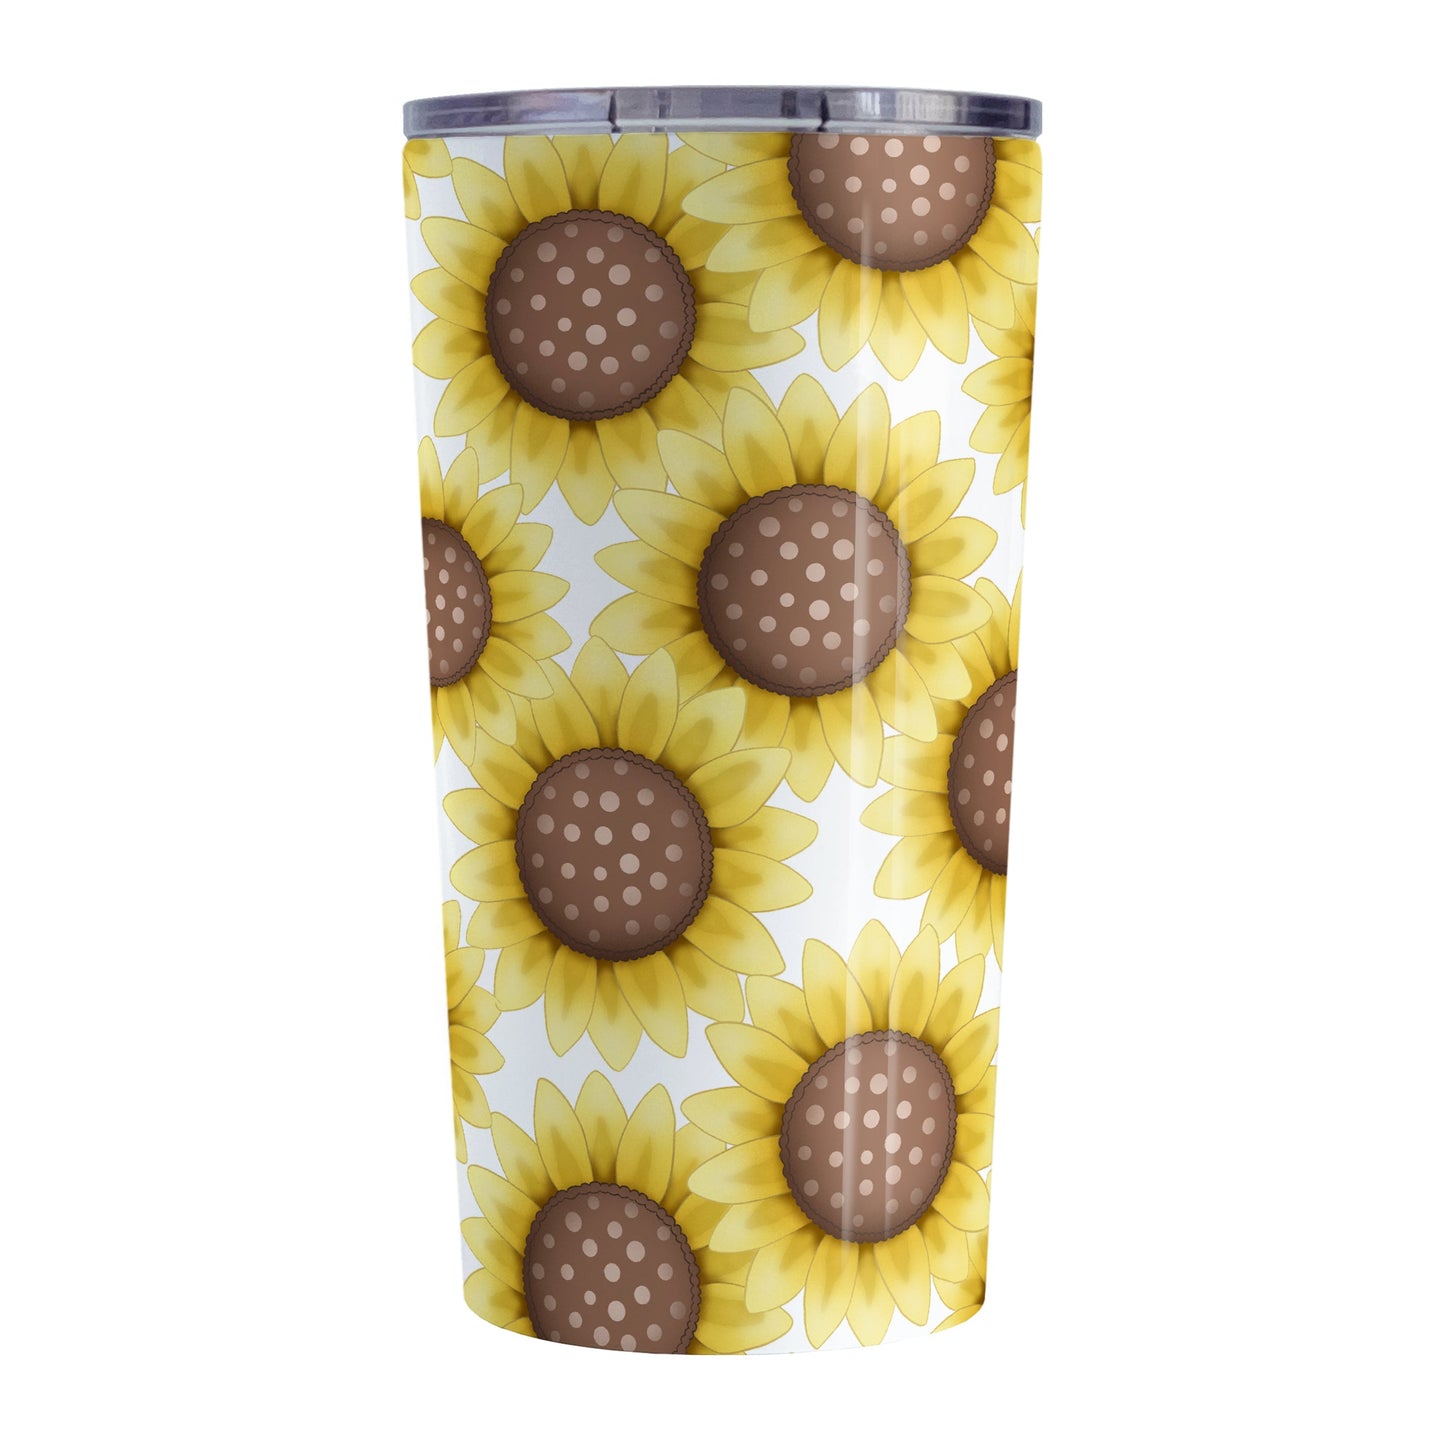 Sunflower Pattern Tumbler Cup (20oz) at Amy's Coffee Mugs. A stainless steel insulated tumbler cup designed with cute yellow sunflowers with dotted brown centers in a pattern that wraps around the cup.